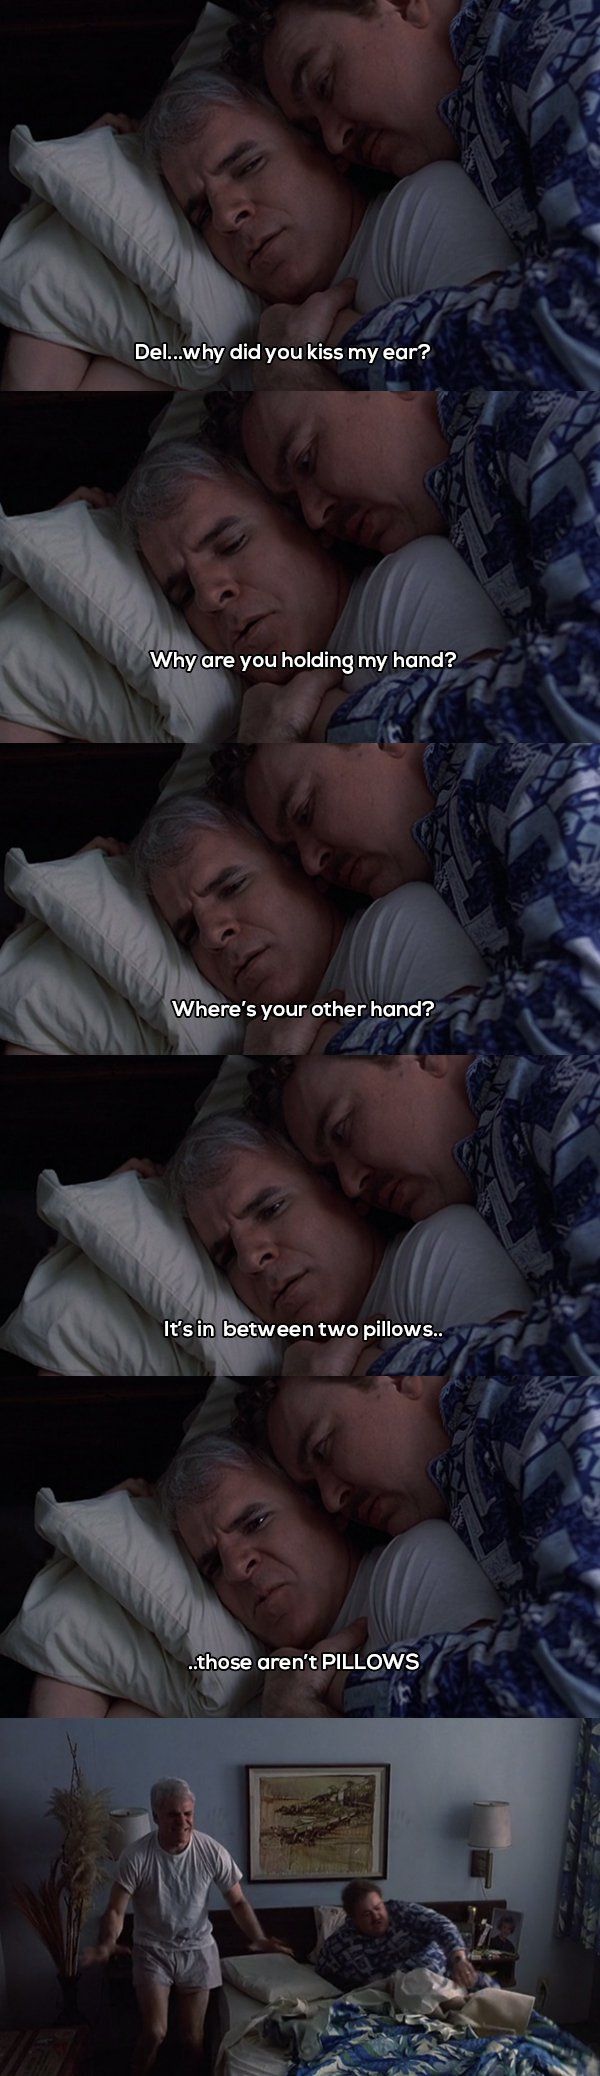 The Best Quotes From "Planes, Trains and Automobiles" (14 pics)